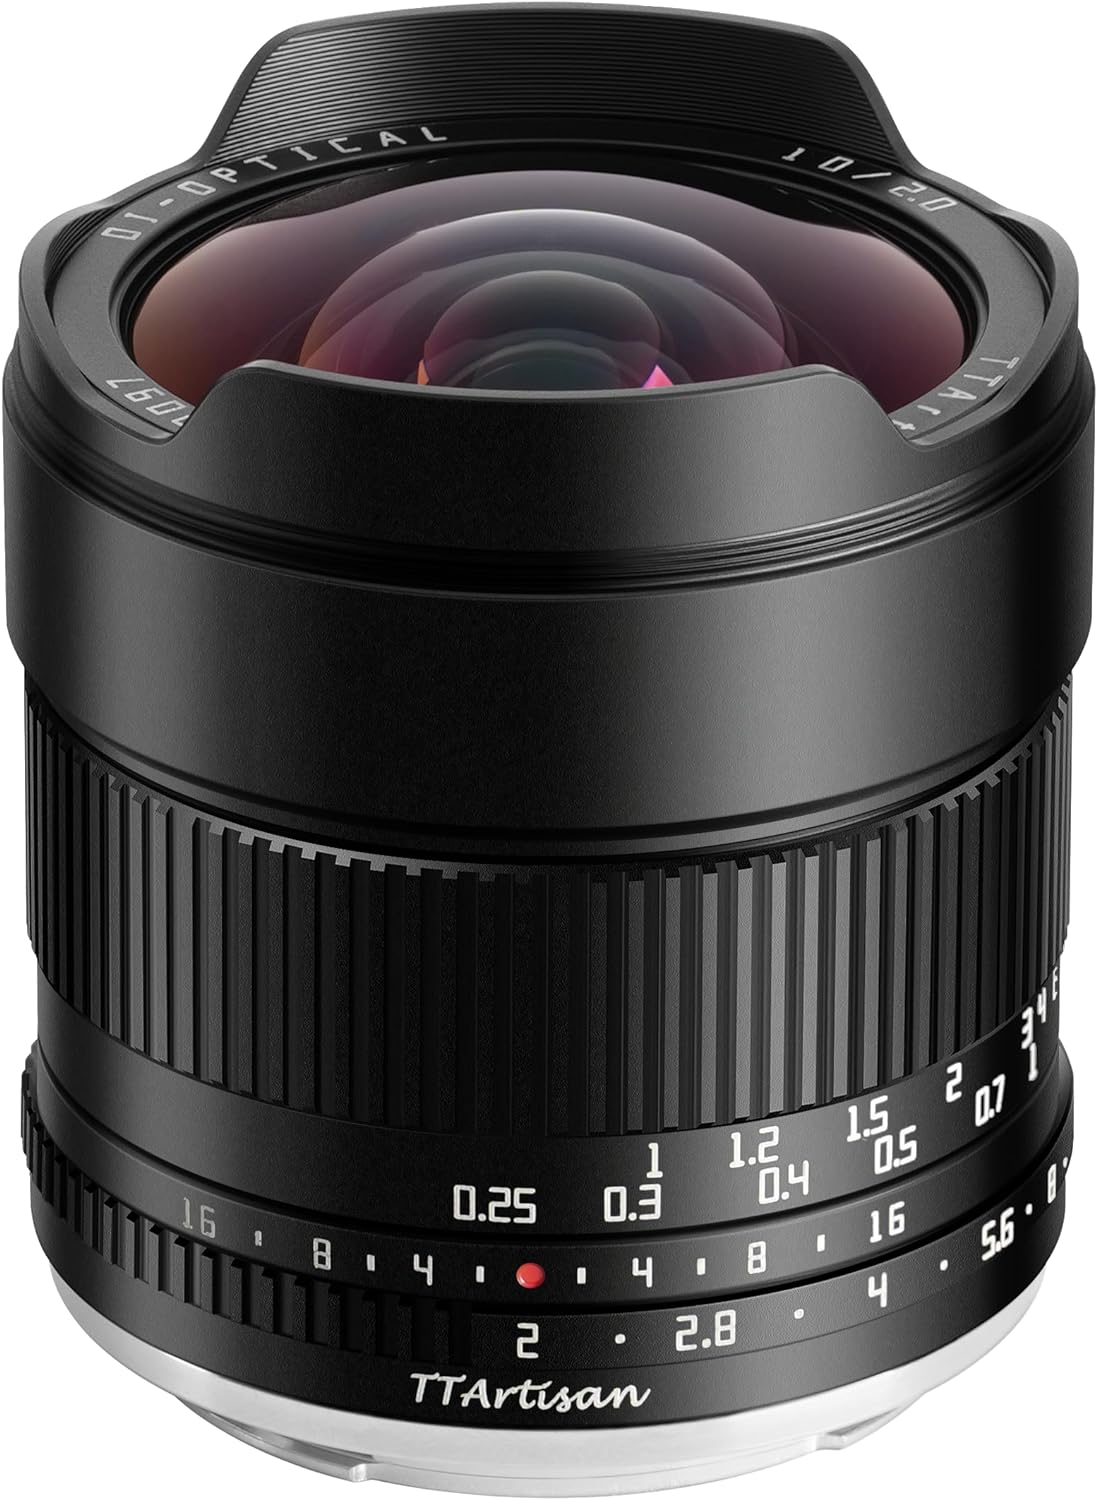 TTArtisan APS-C 10mm F2 Metal Bodied Lens Compatible with Canon RF Mount - Black